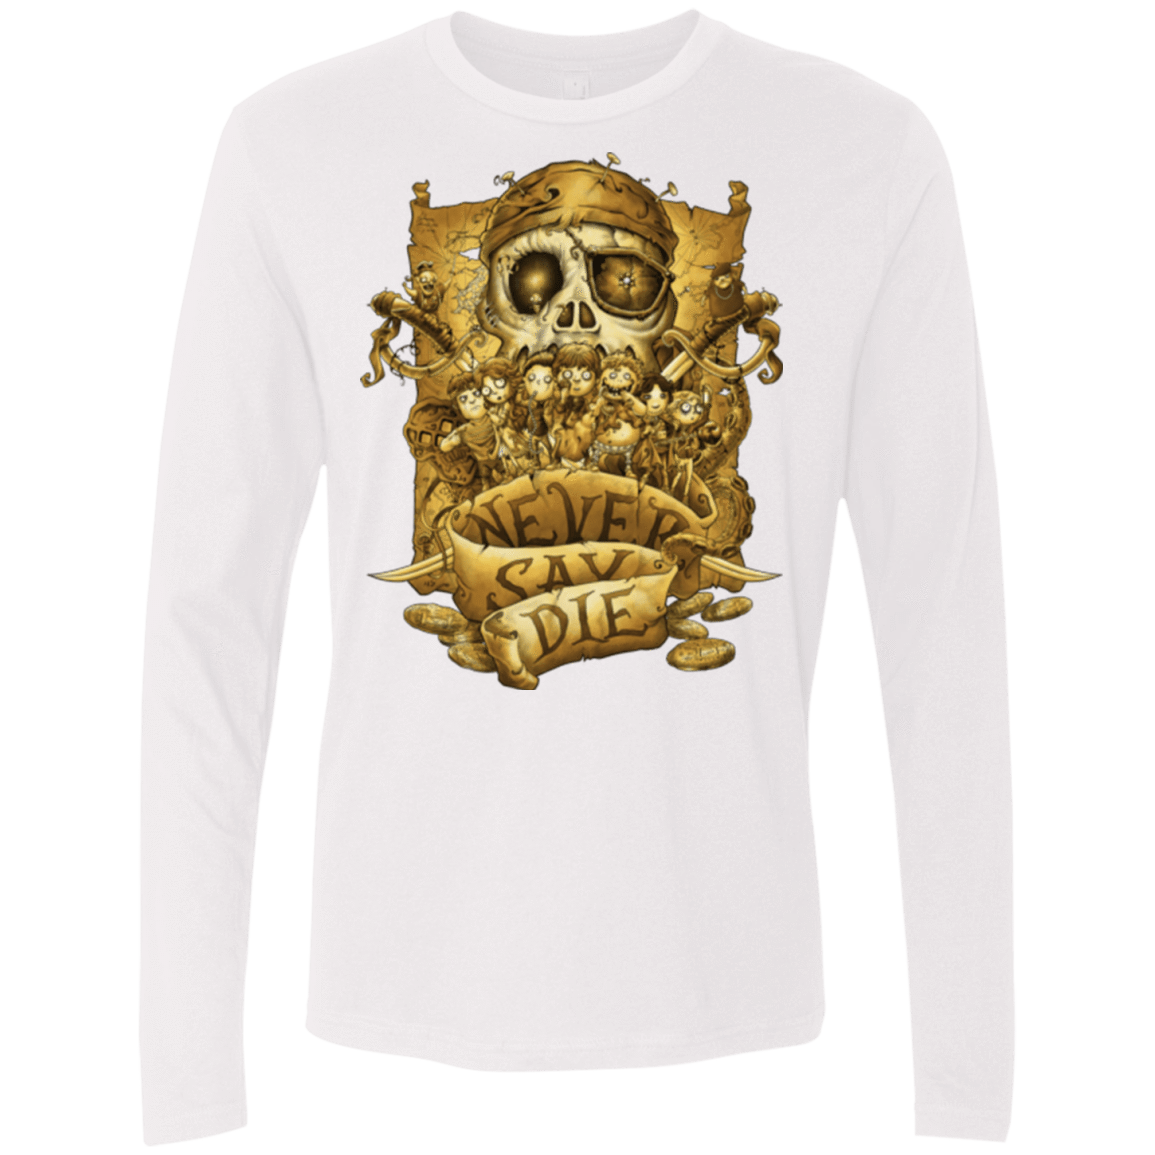 T-Shirts White / Small Never Say Die Men's Premium Long Sleeve